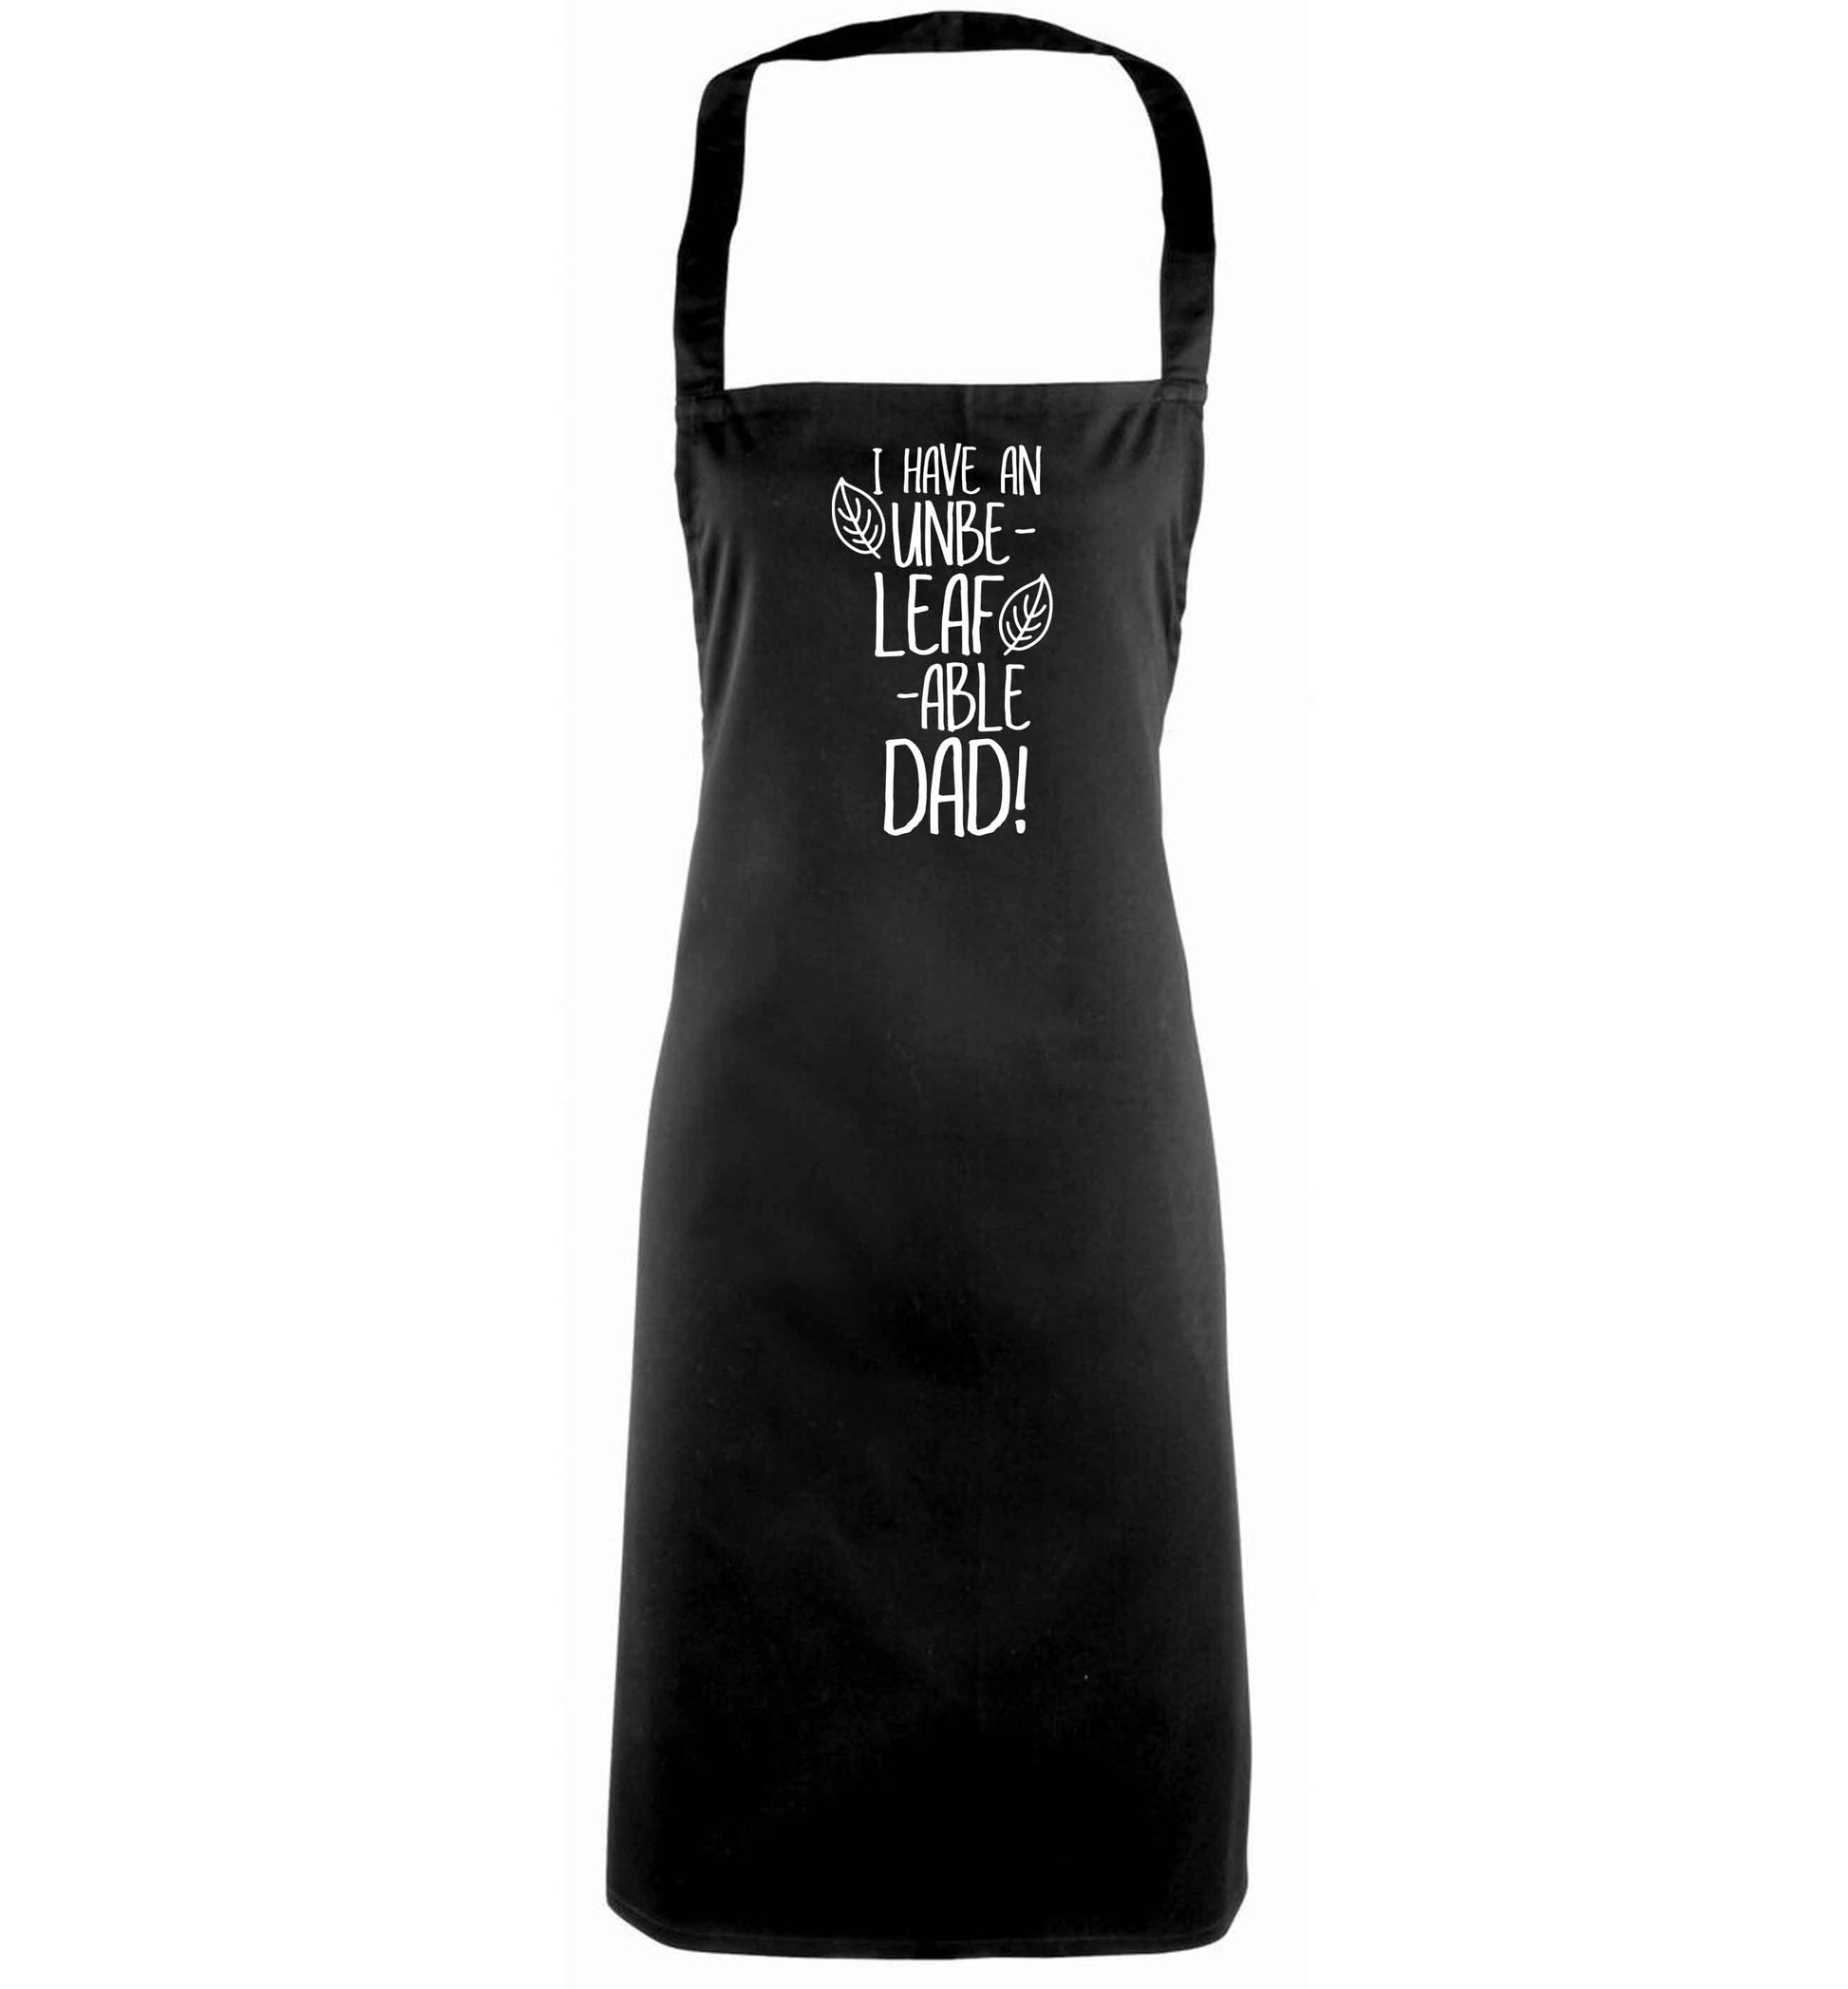 I have an unbe-leaf-able dad black apron